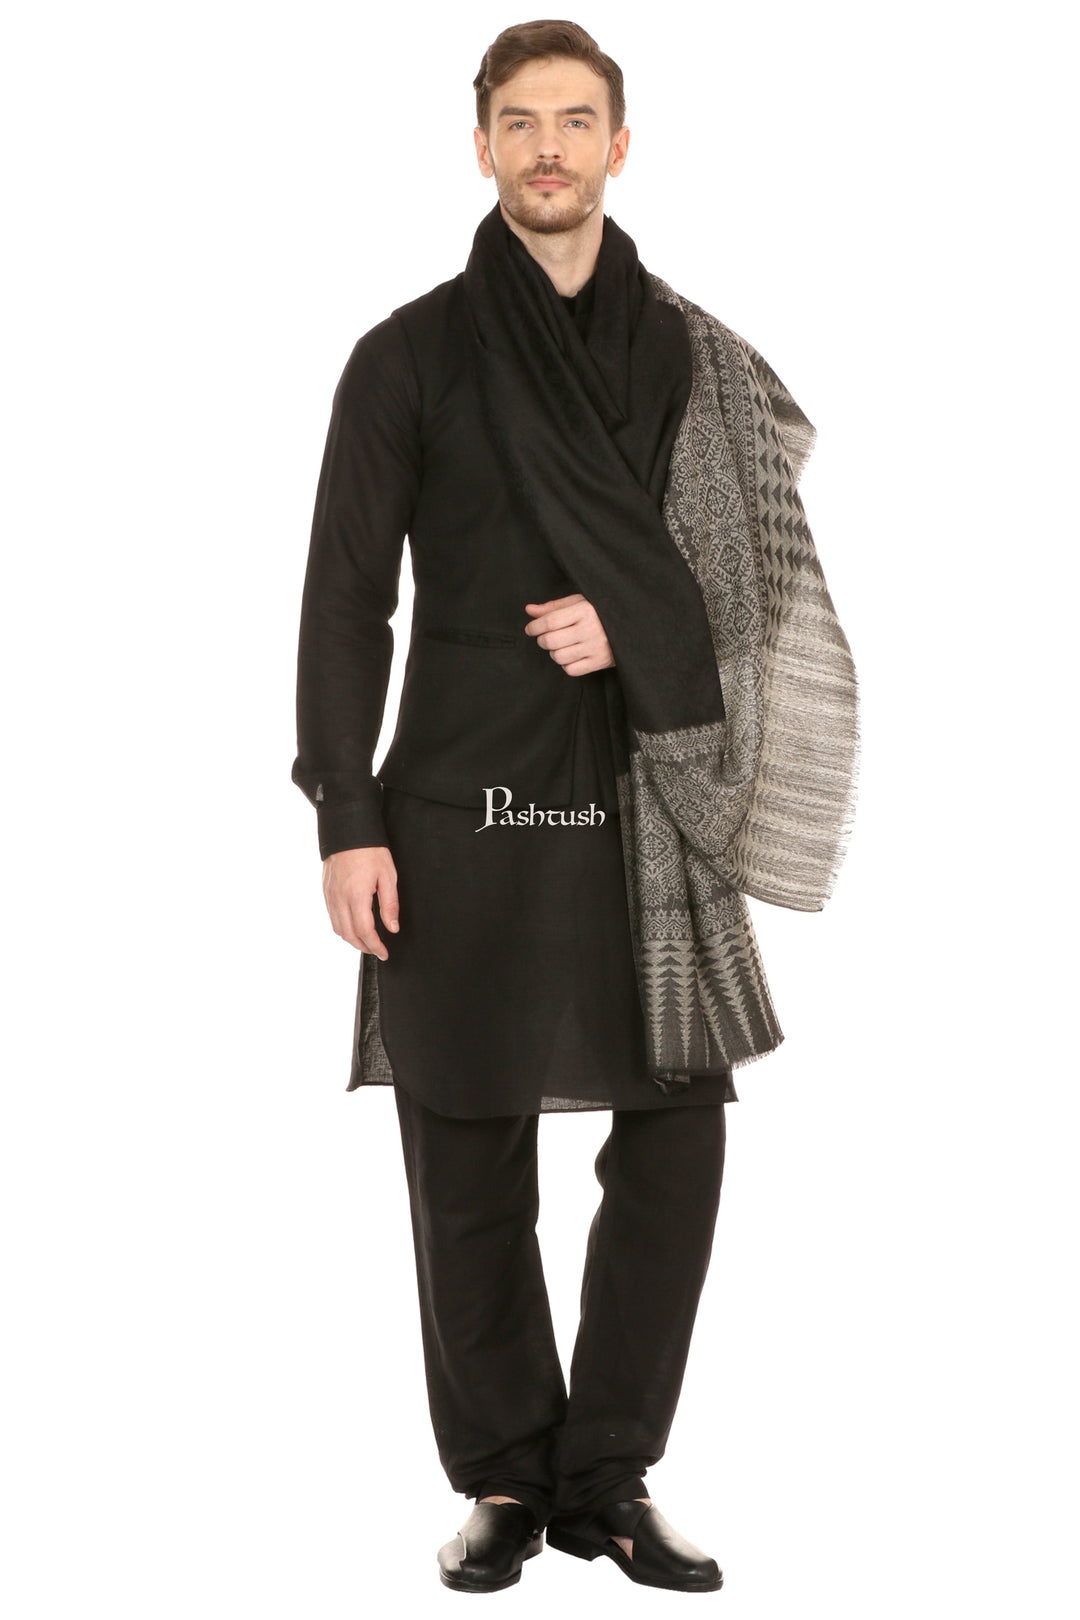 Pashtush India Mens Scarves Stoles and Mufflers Pashtush Mens Stole Scarf, Extra Soft Wool - Rich Black